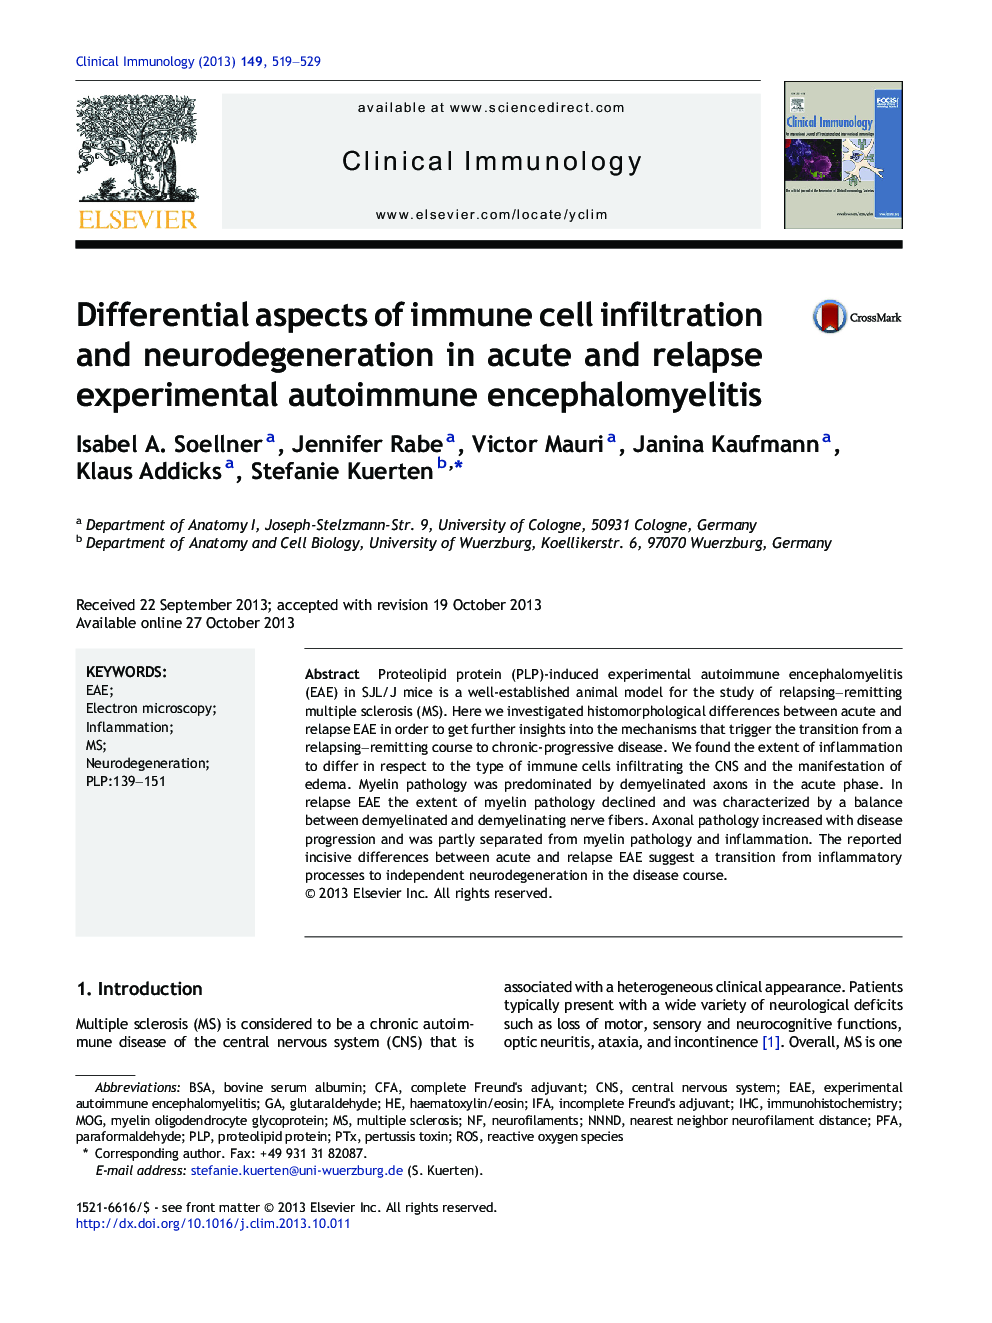 Differential aspects of immune cell infiltration and neurodegeneration in acute and relapse experimental autoimmune encephalomyelitis